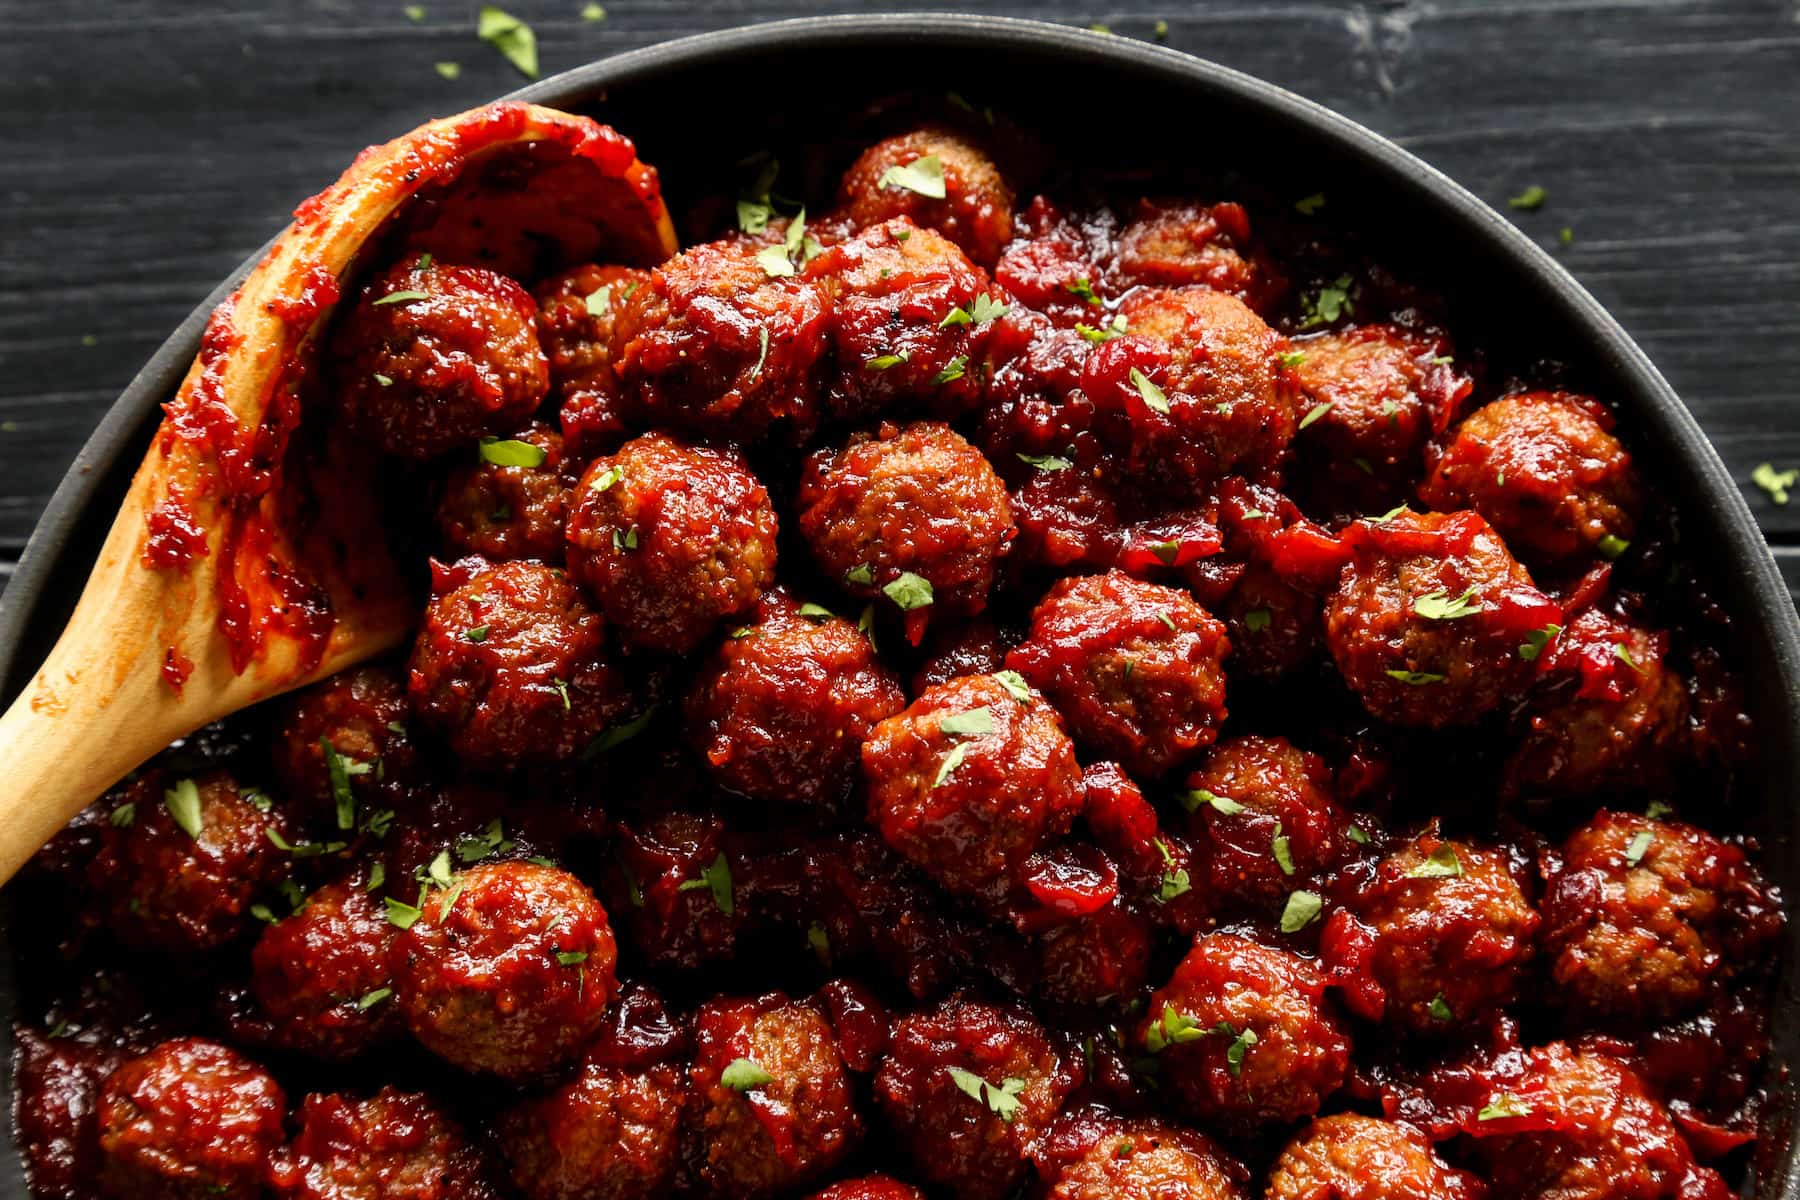 Meatballs made with leftover cranberry sauce